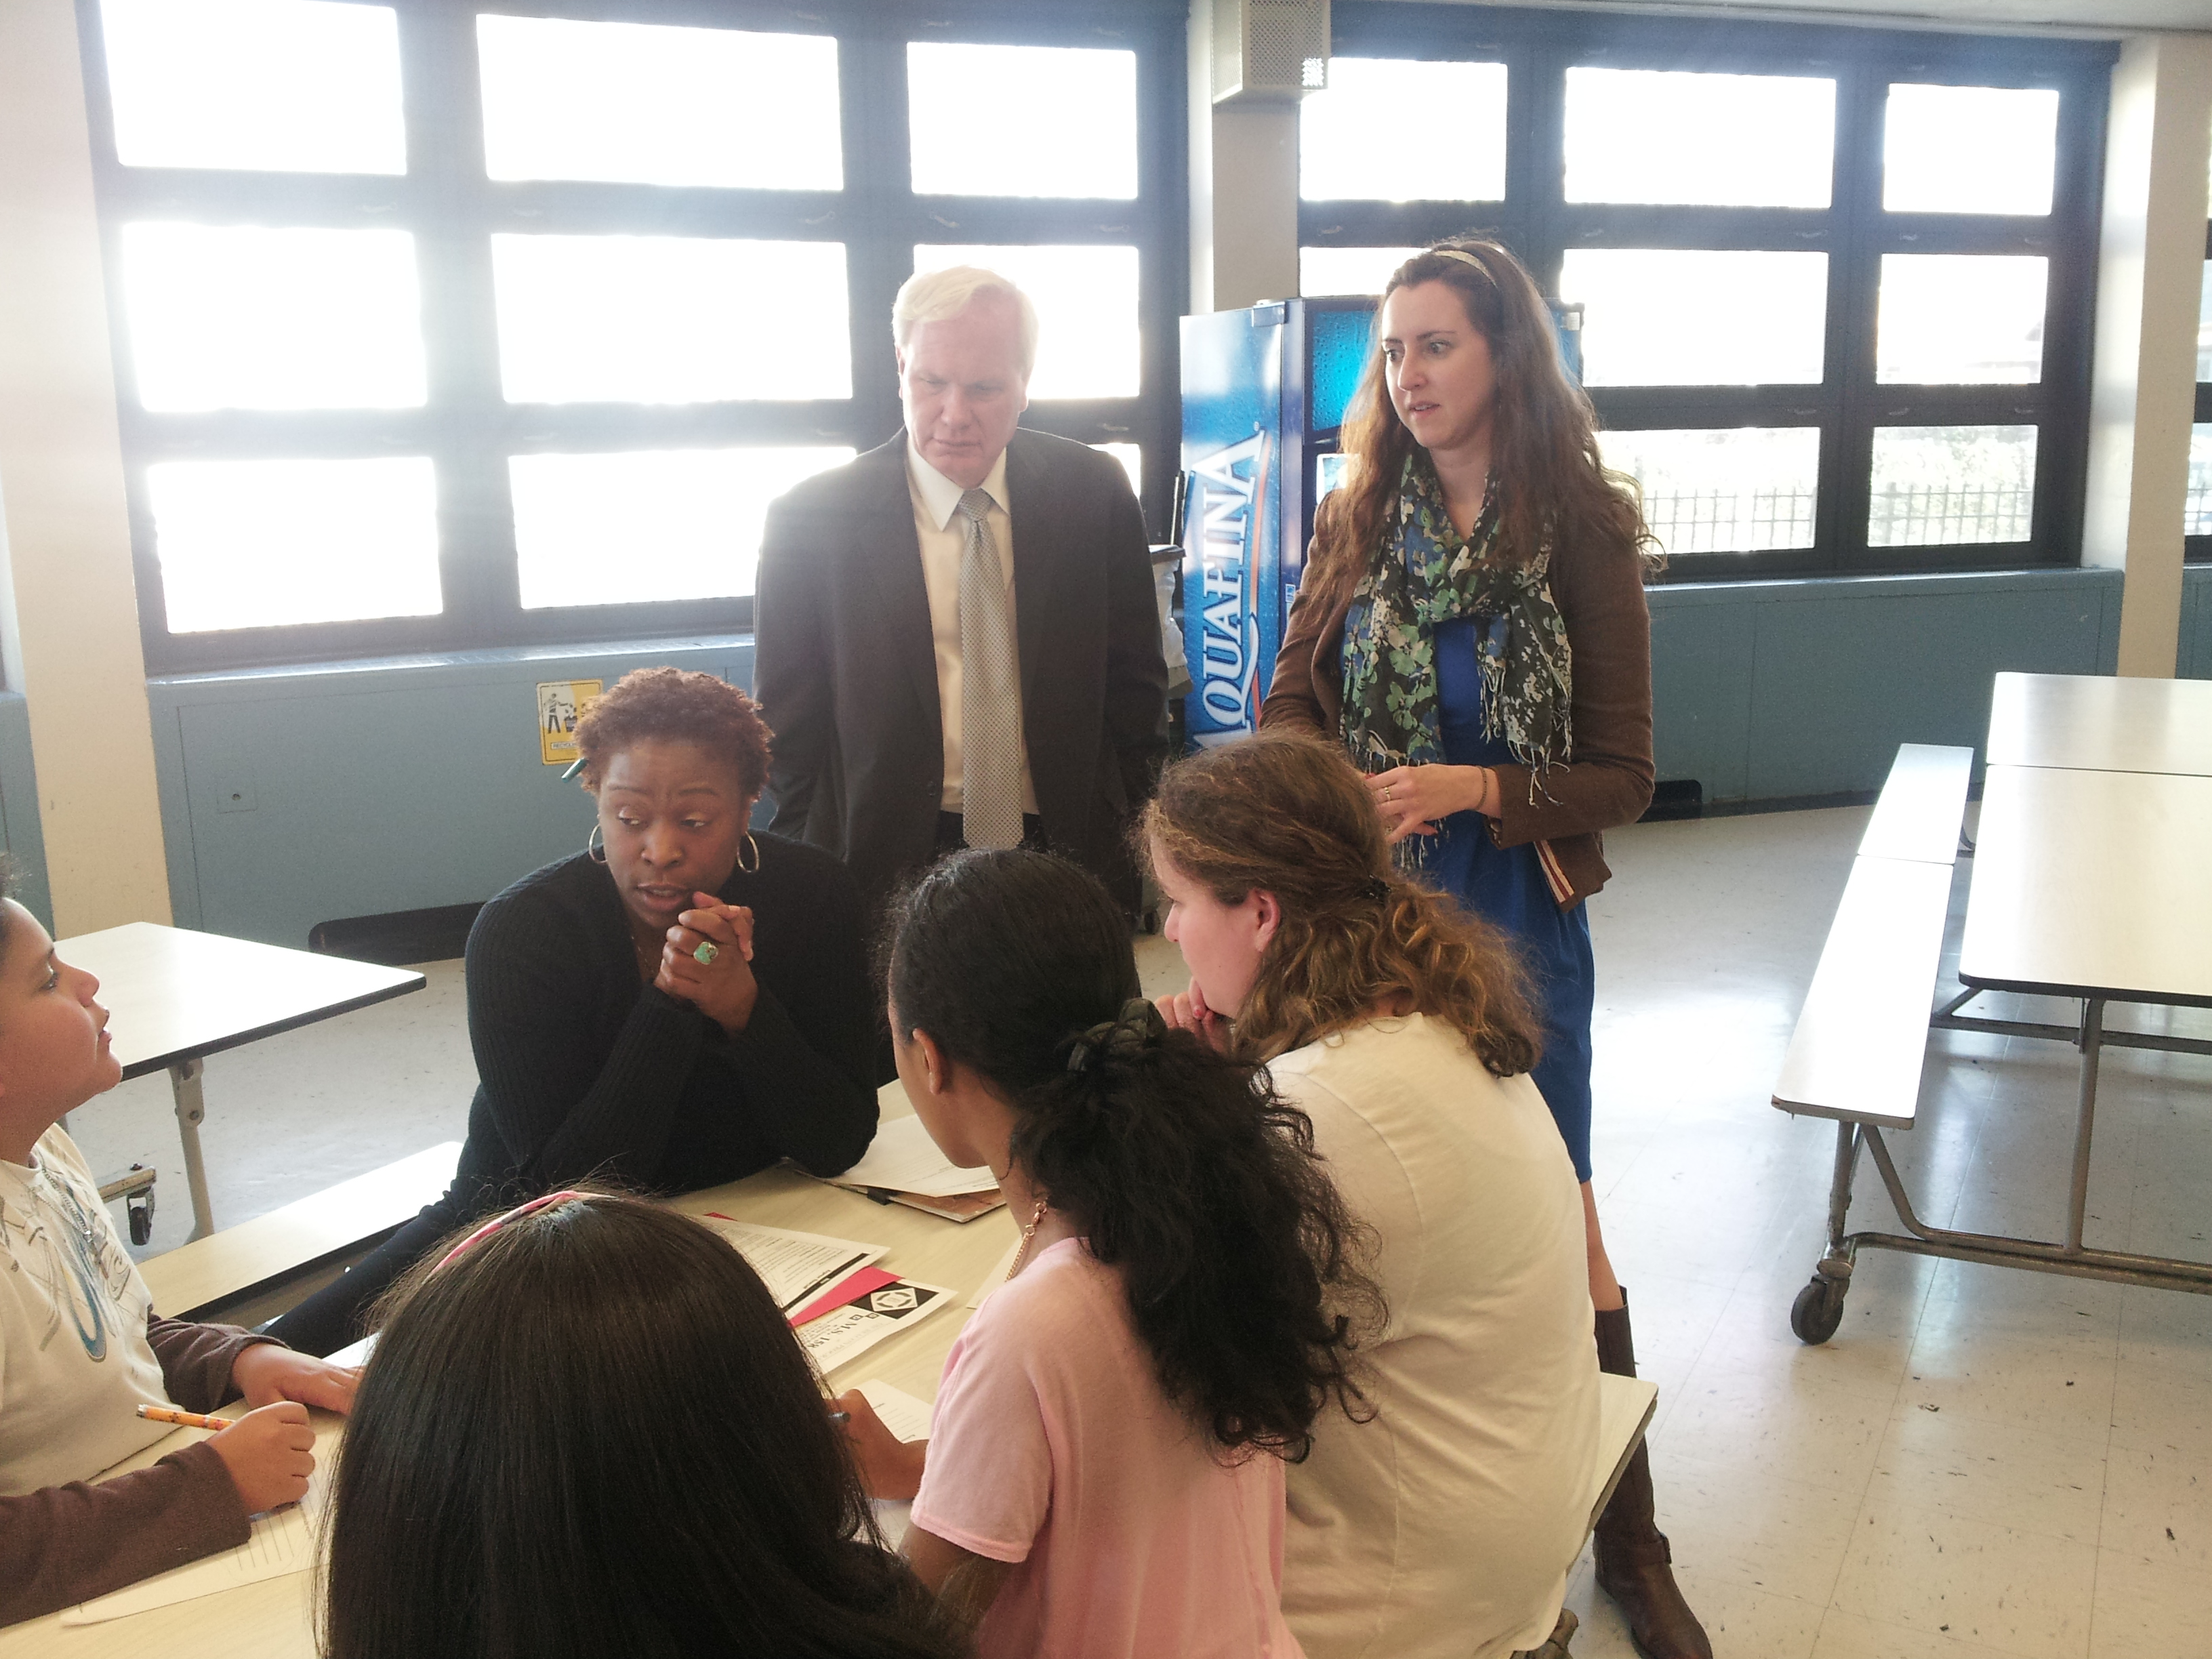 Assemblywoman Nily Rozic and State Senator Tony Avella visited M.S. 158 in Bayside to fight for continued funding its Beacon Program.